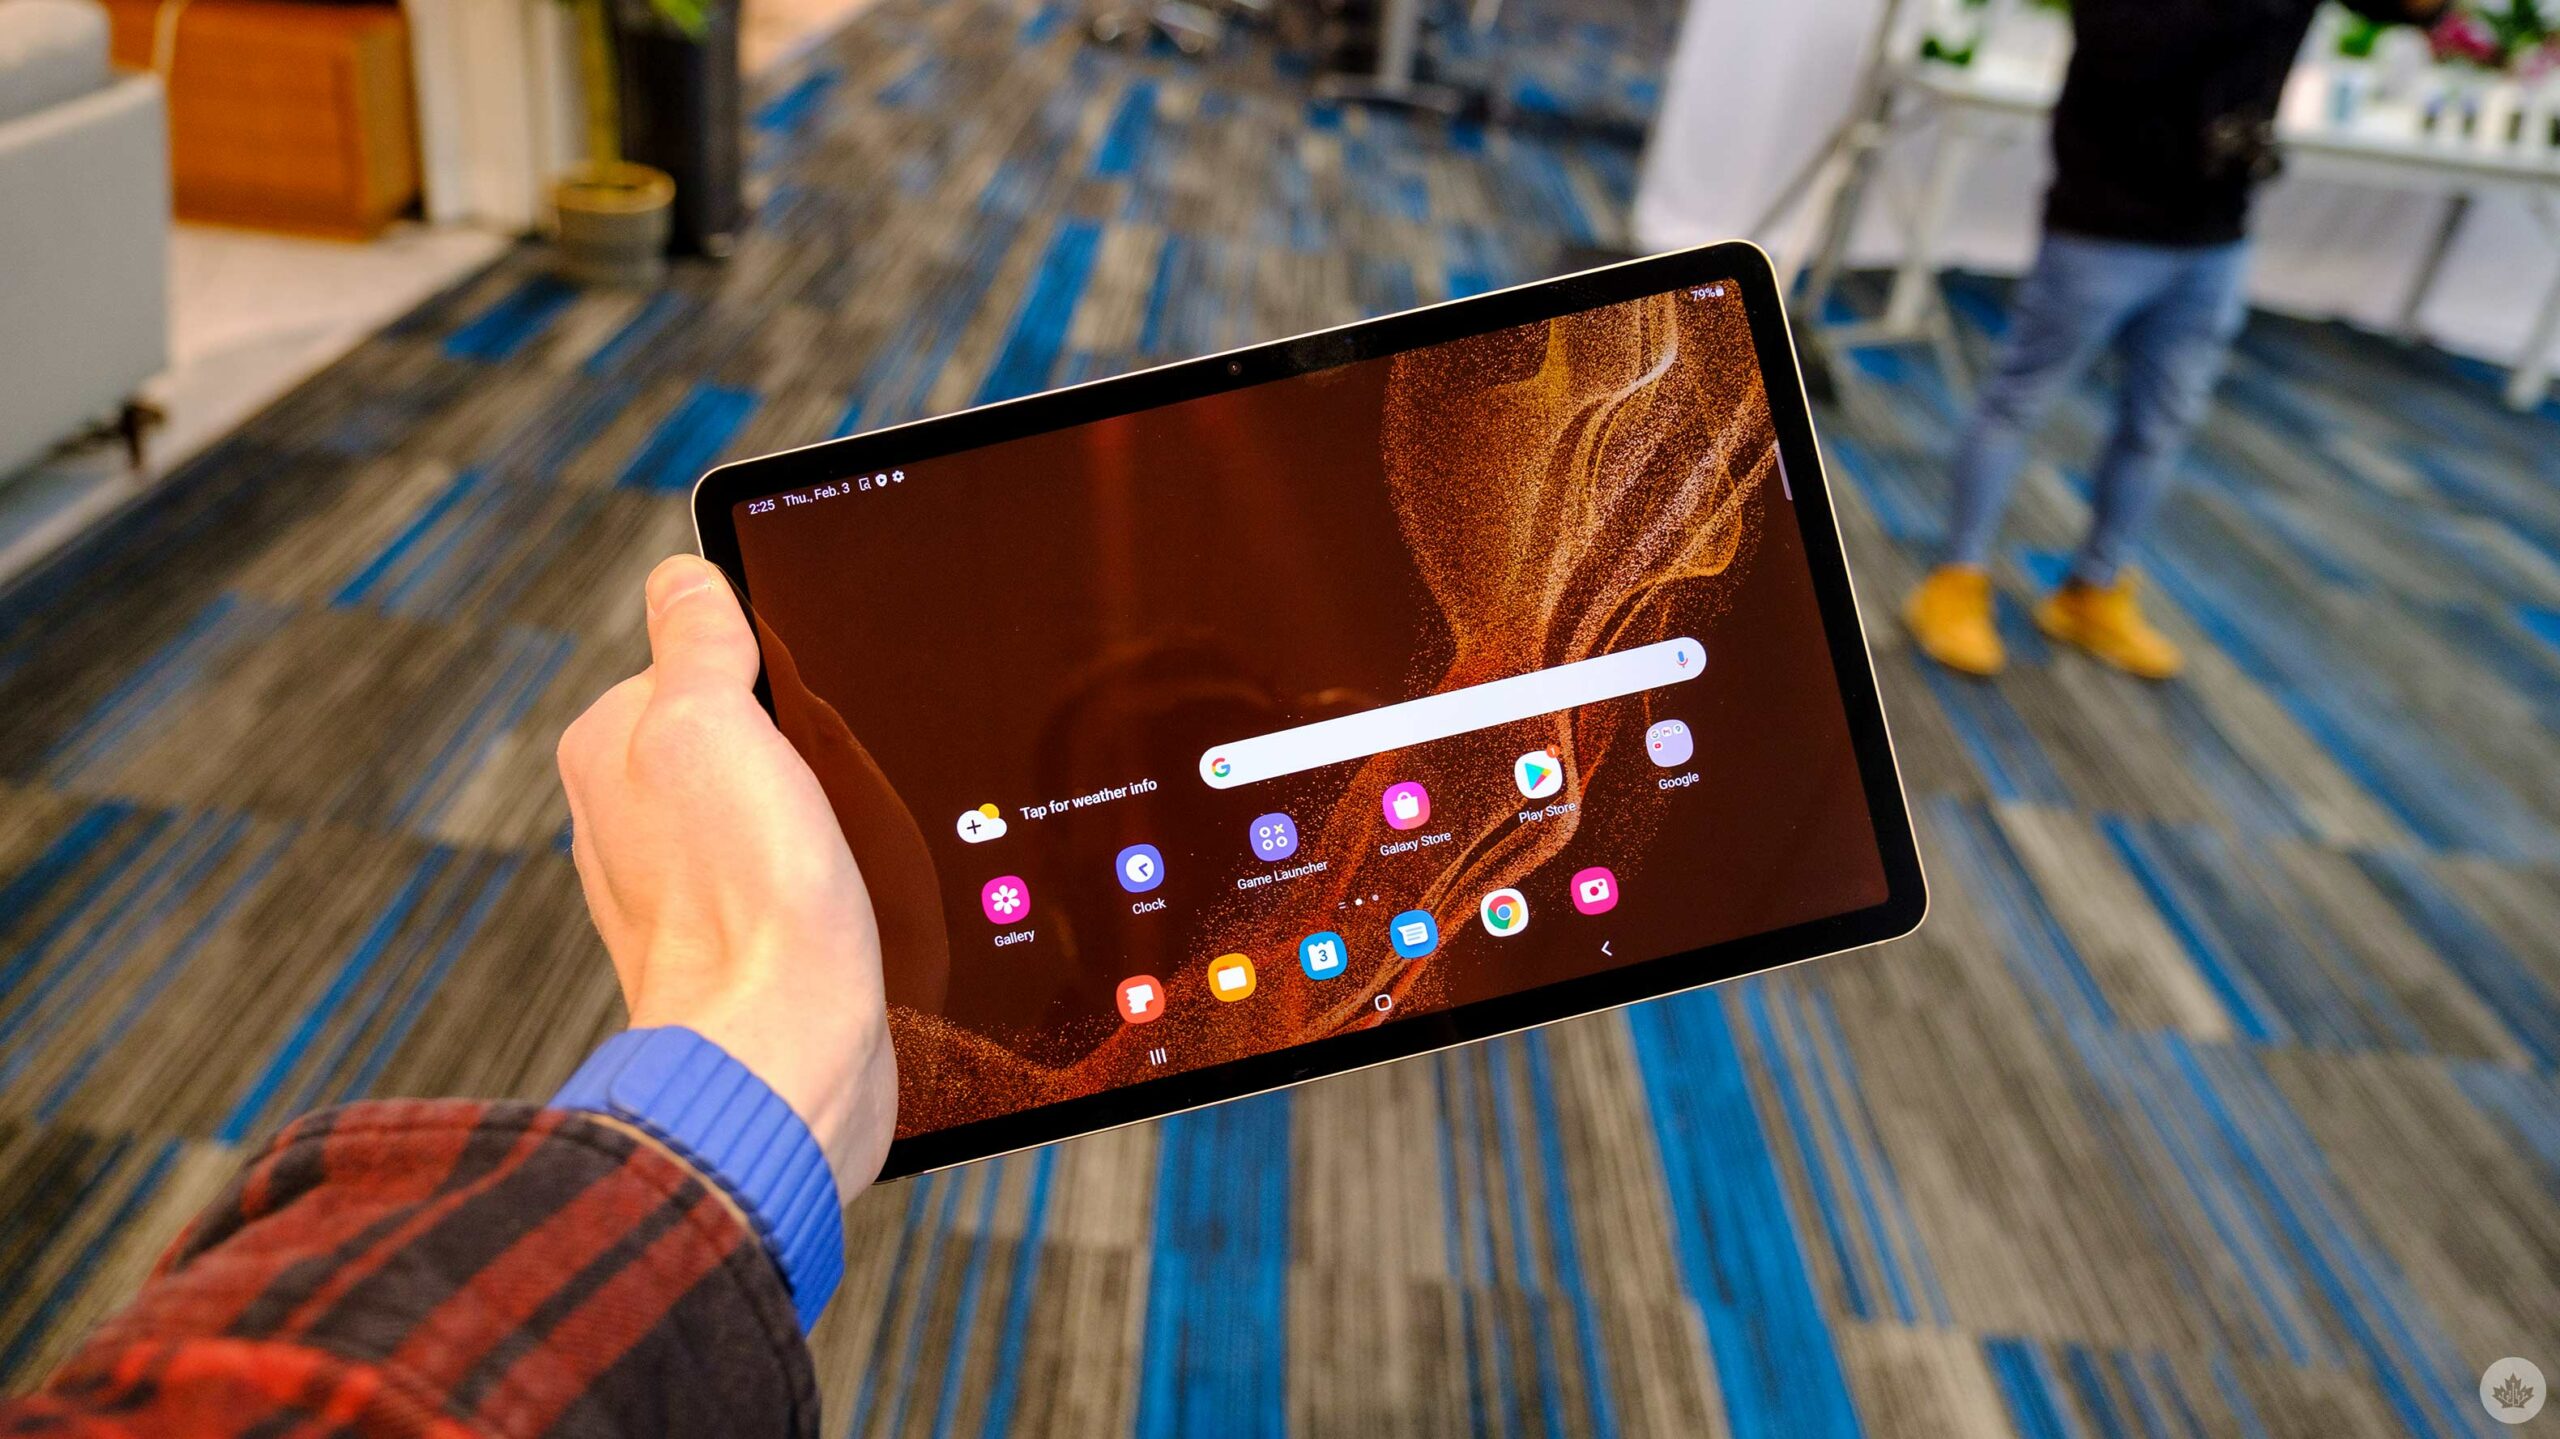 Samsung announces new Galaxy Tab S8 tablet line with massive 14